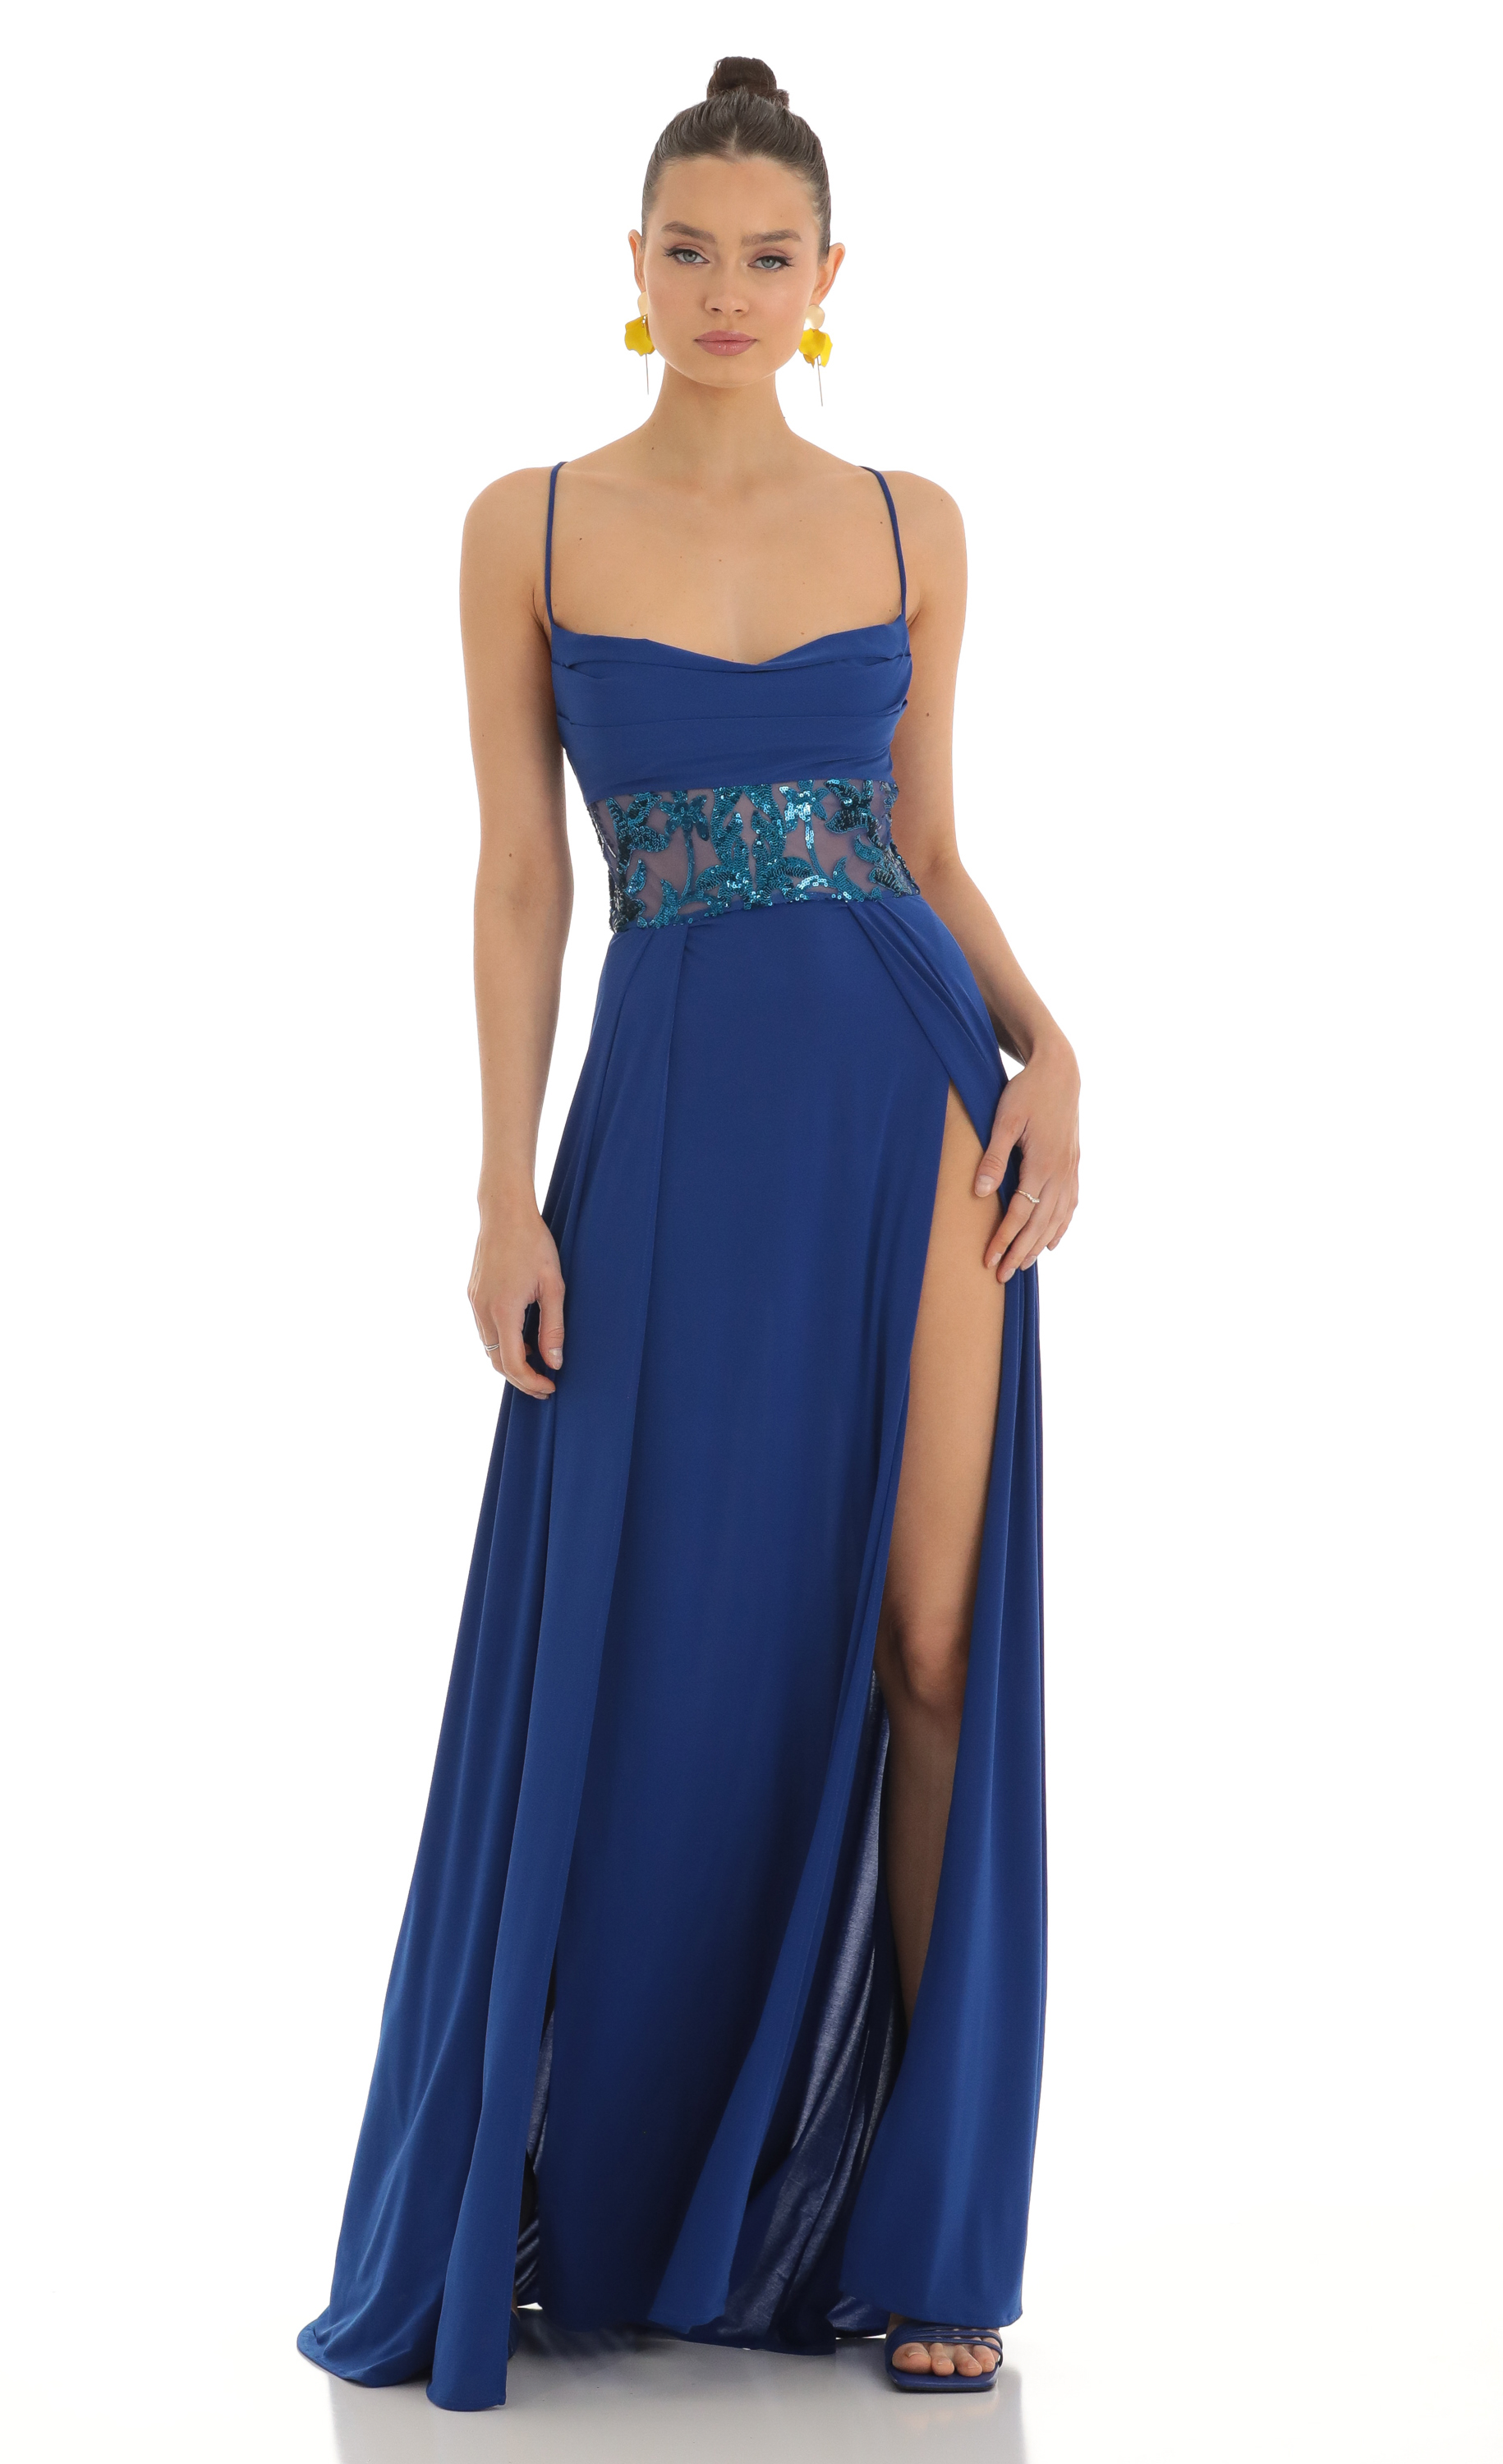 Rayla Floral Maxi Dress in Royal Blue